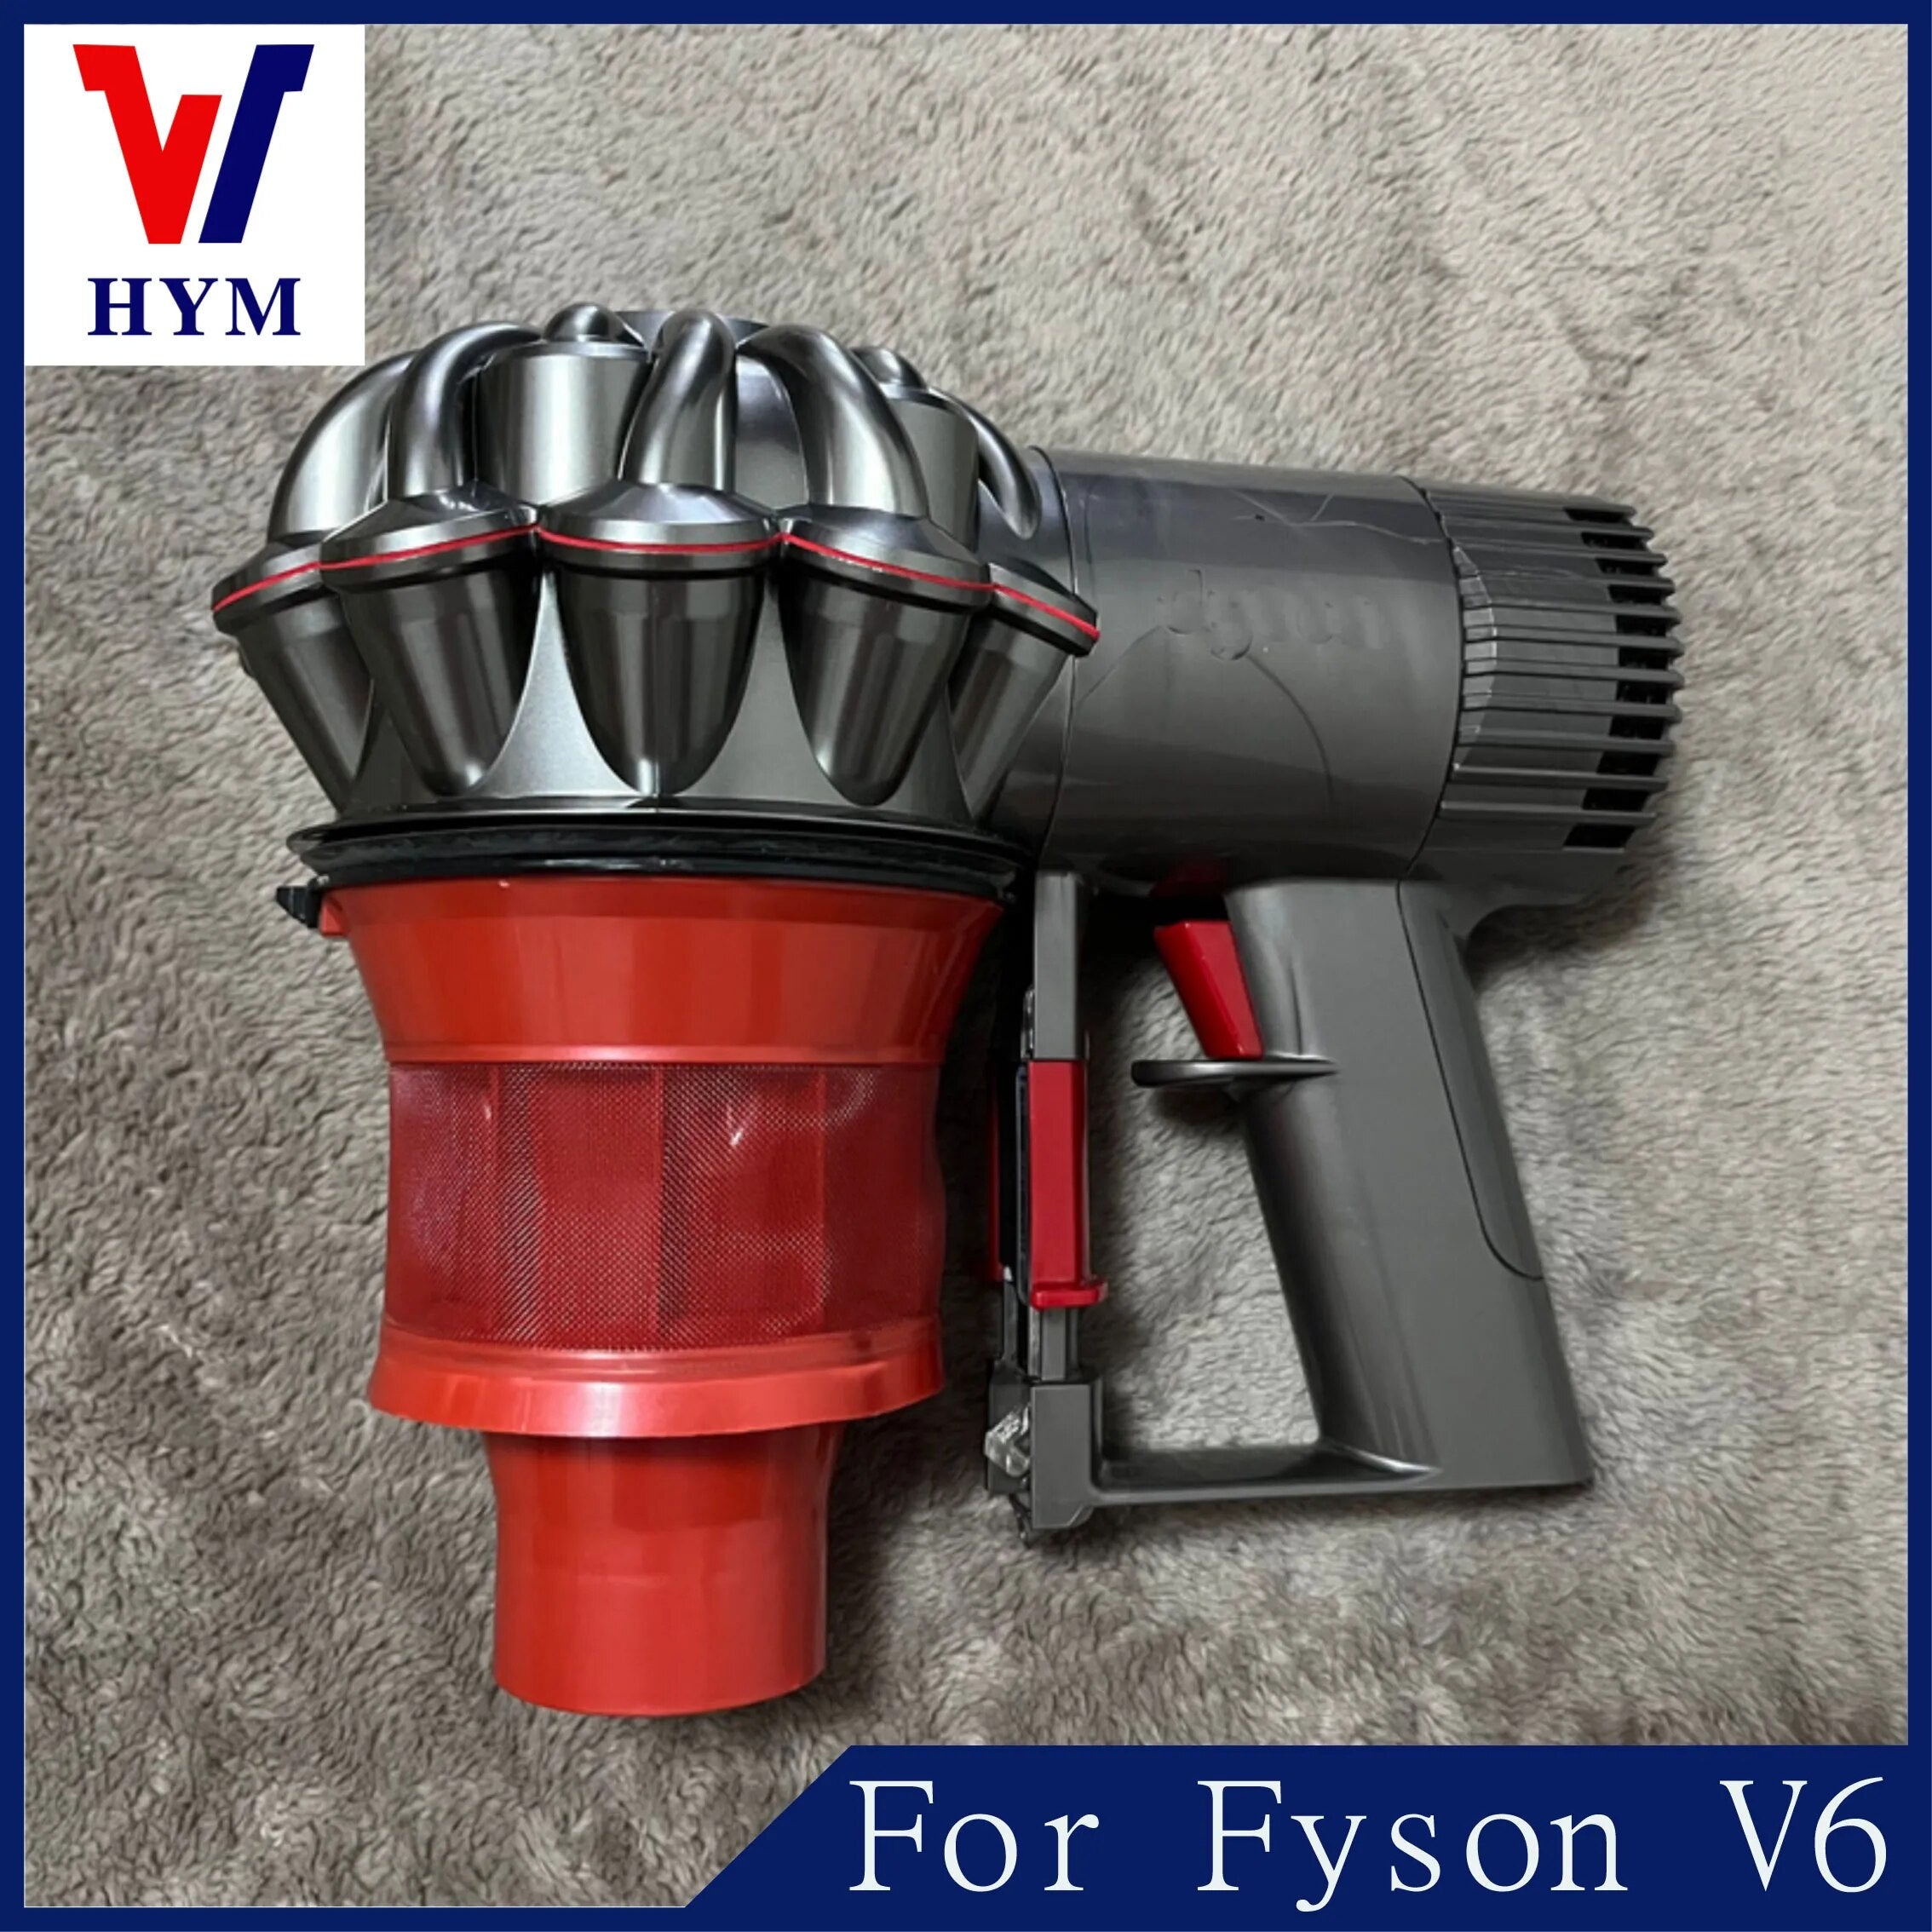 For Dyson V6 motor Accessories original Cyclone Dust Collector washable Hepa Filter Robot Vacuum Cleaner replaceable spare parts